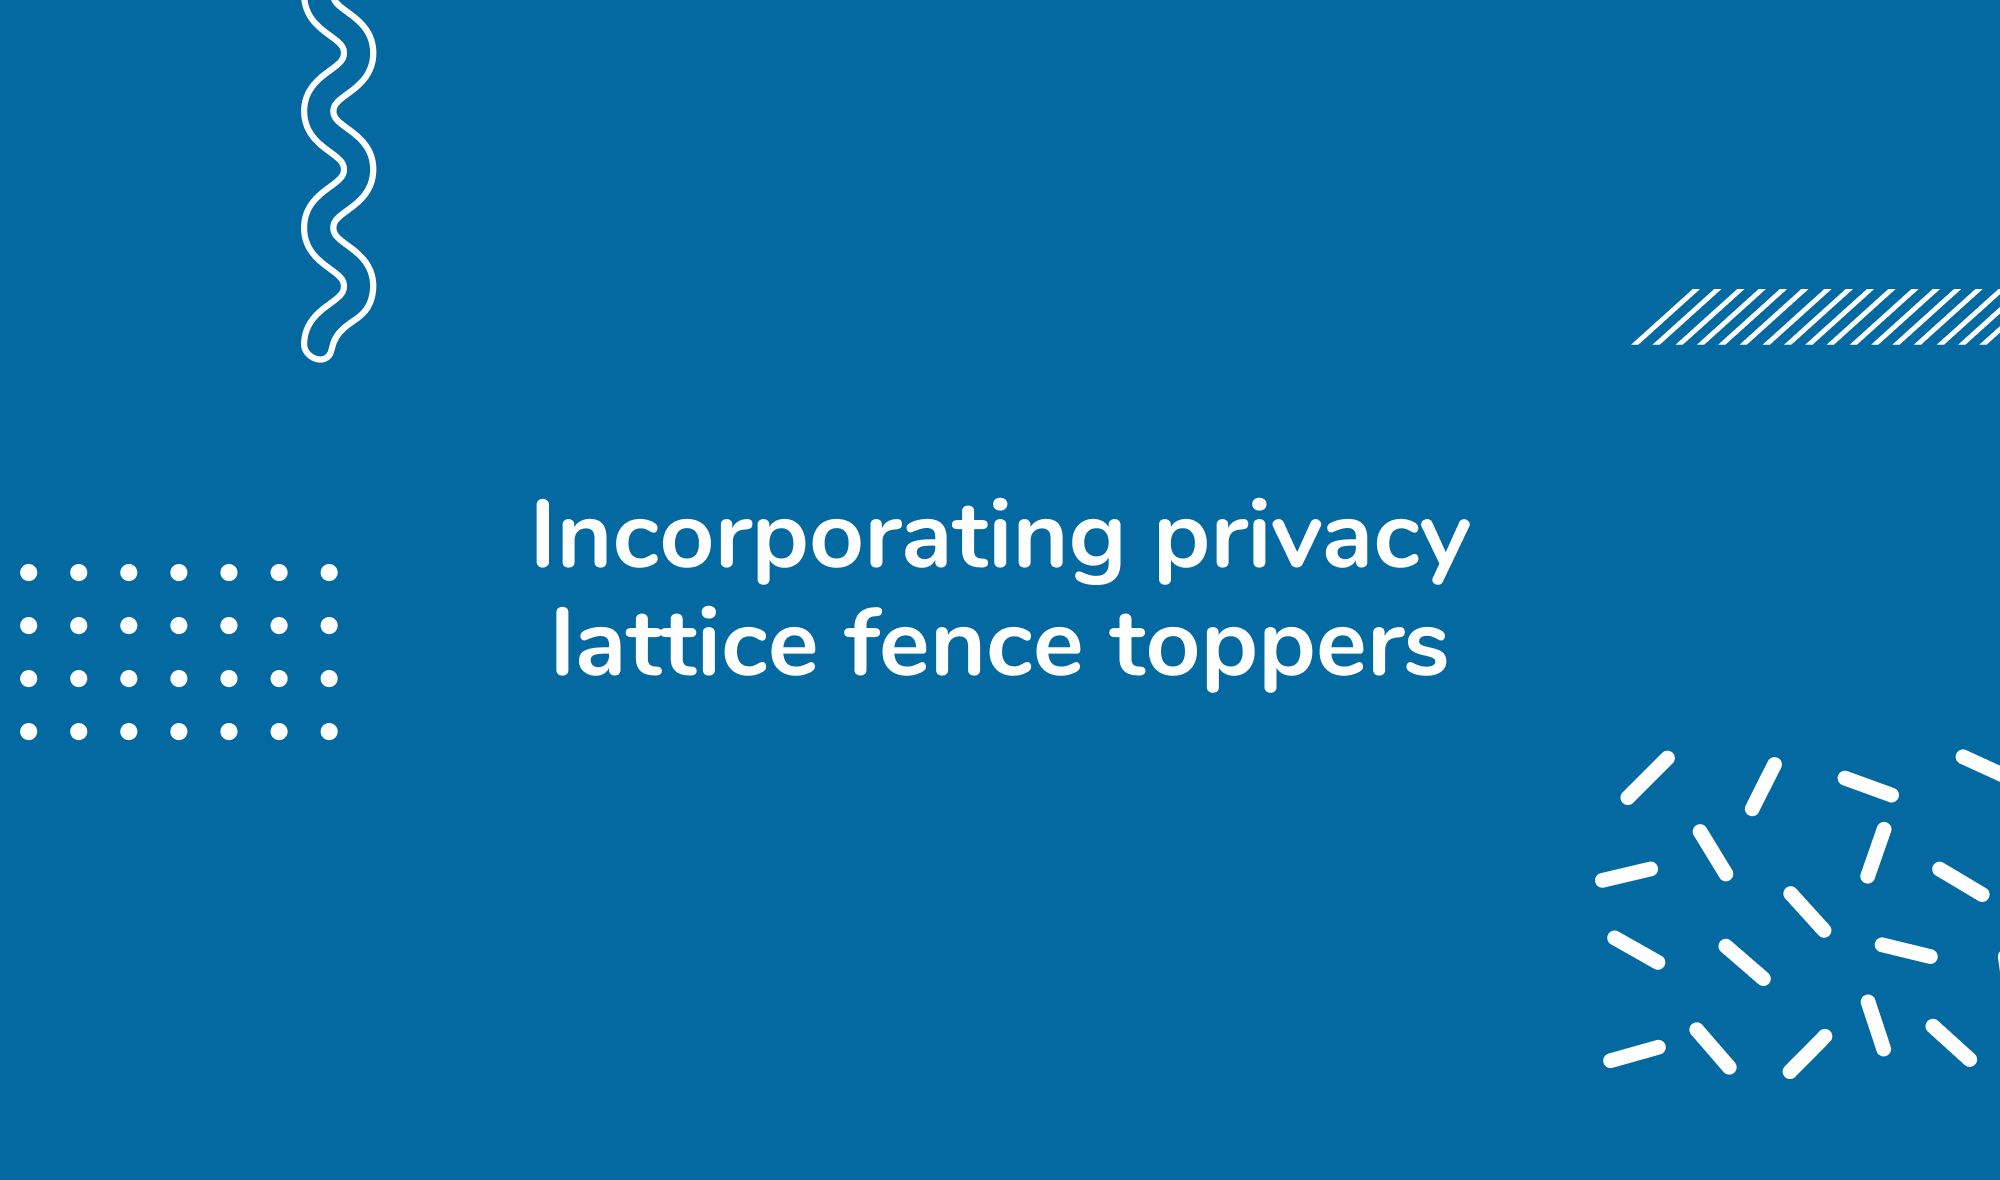 Incorporating privacy lattice fence toppers